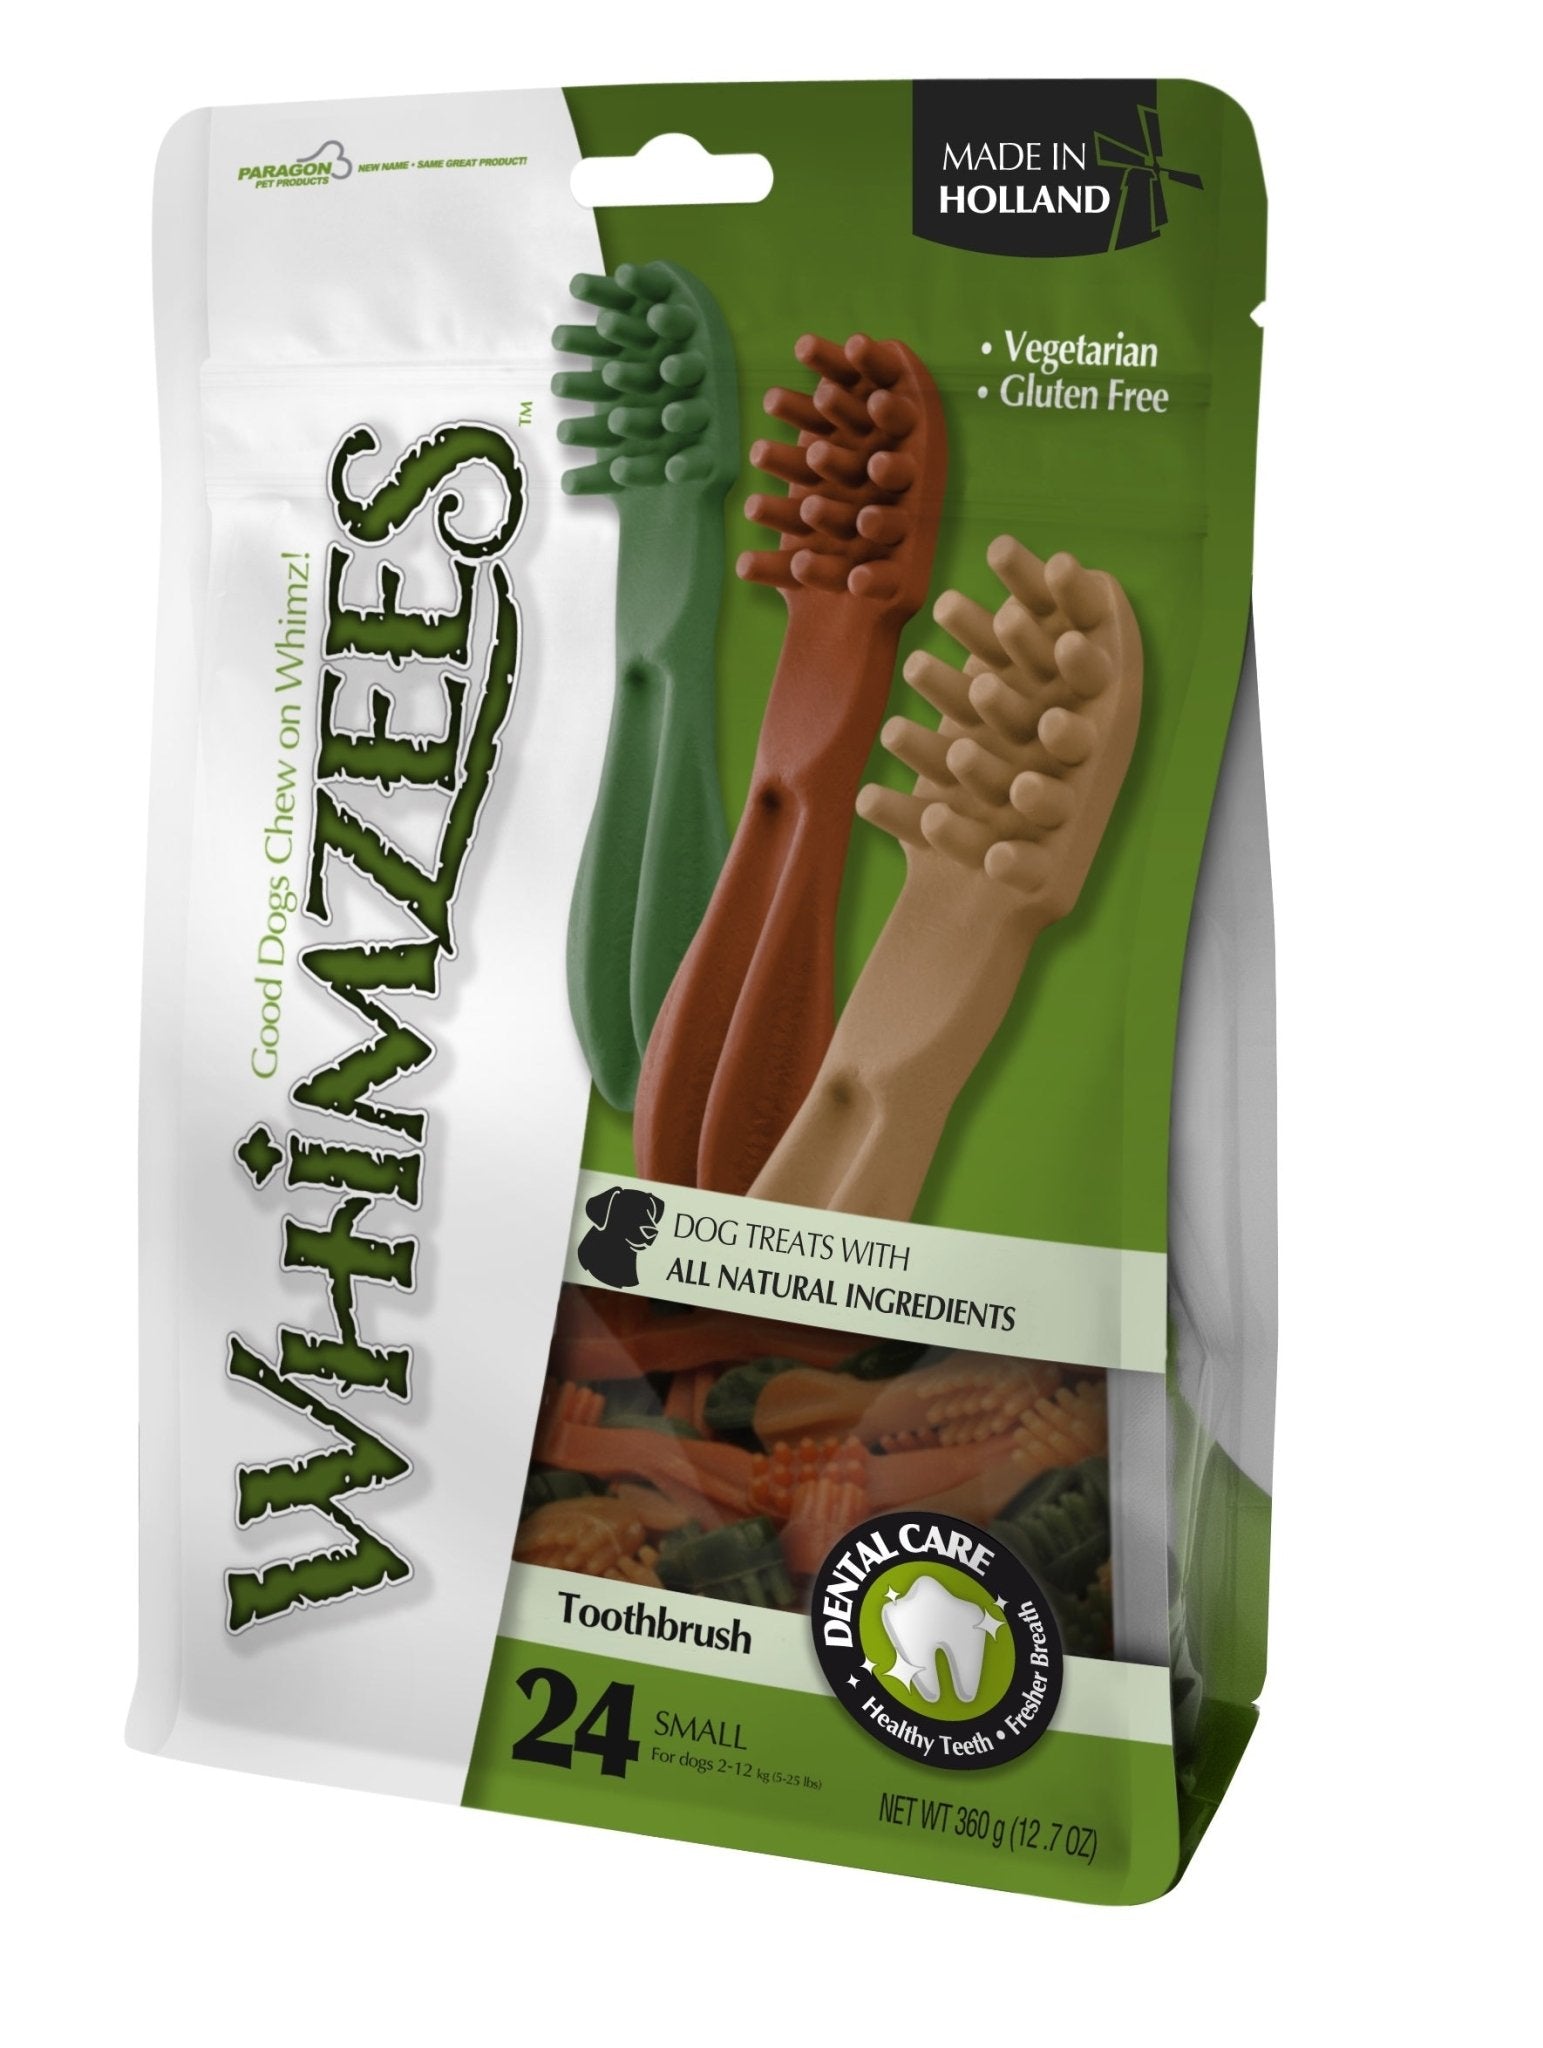 Whimzees Toothbrush Small 6 x 24 Bags x 90mm, Whimzees,